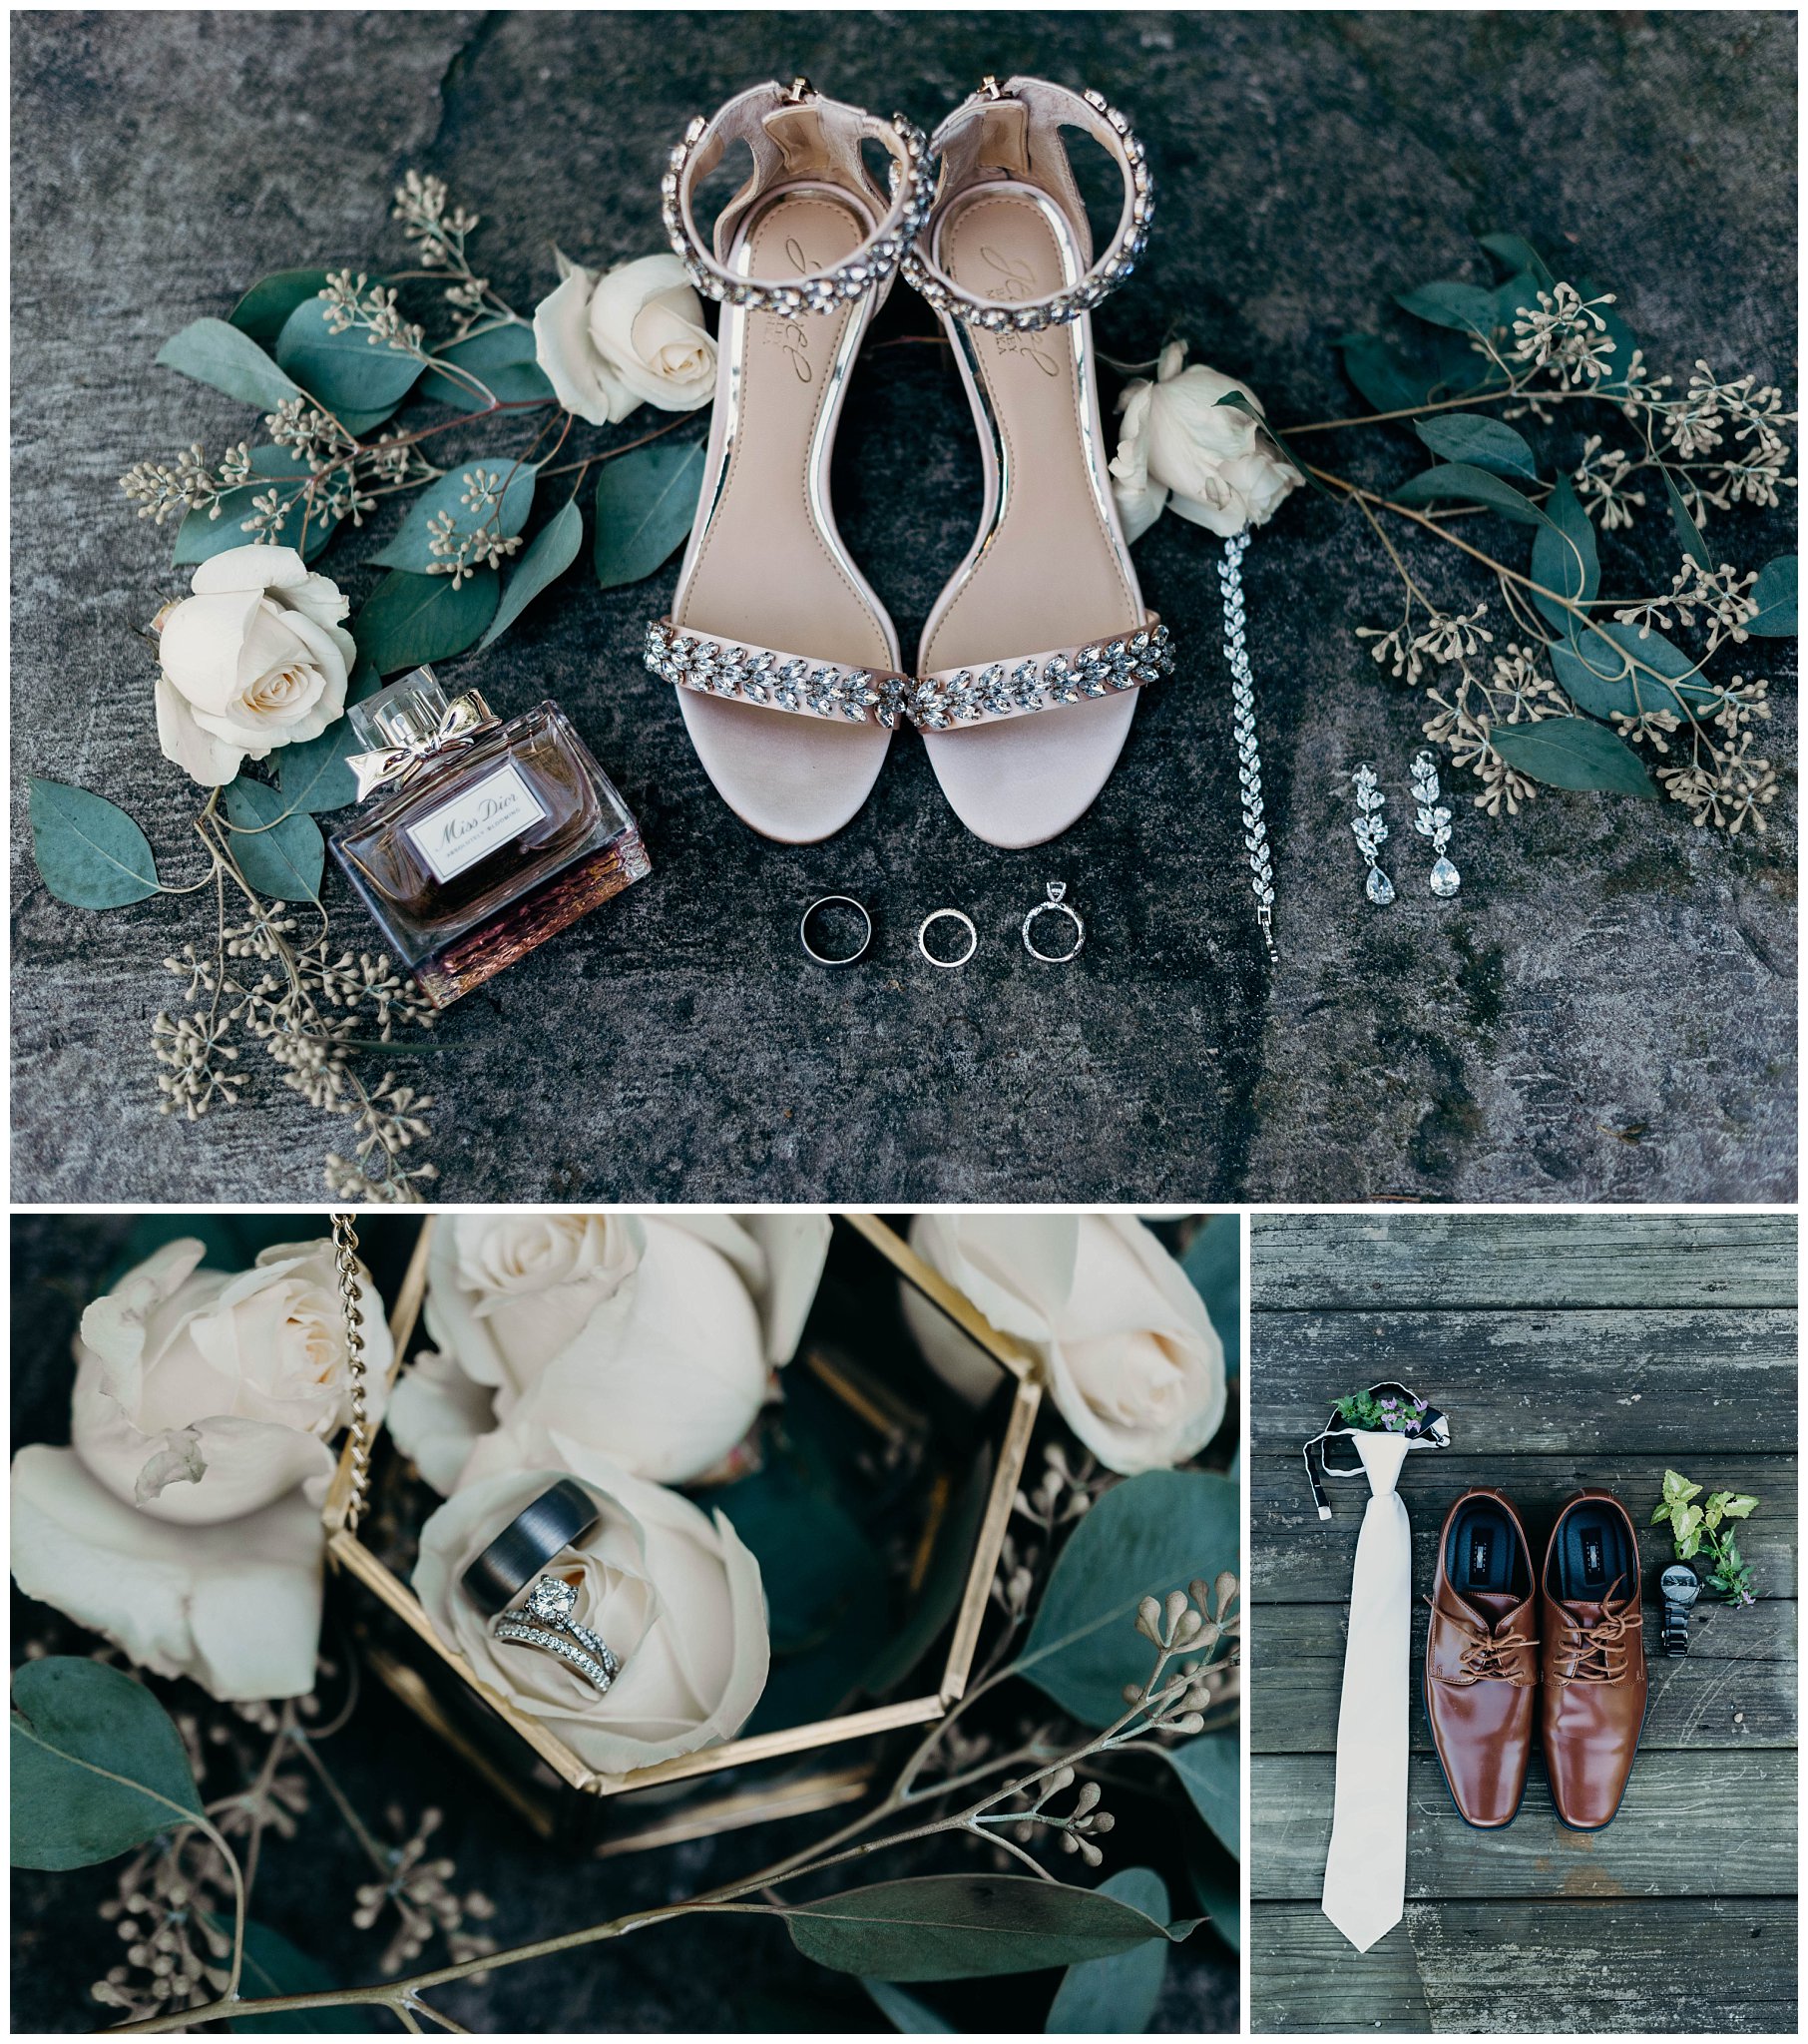 Wedding details at Rustic Acres Farm in Pittsburgh PA